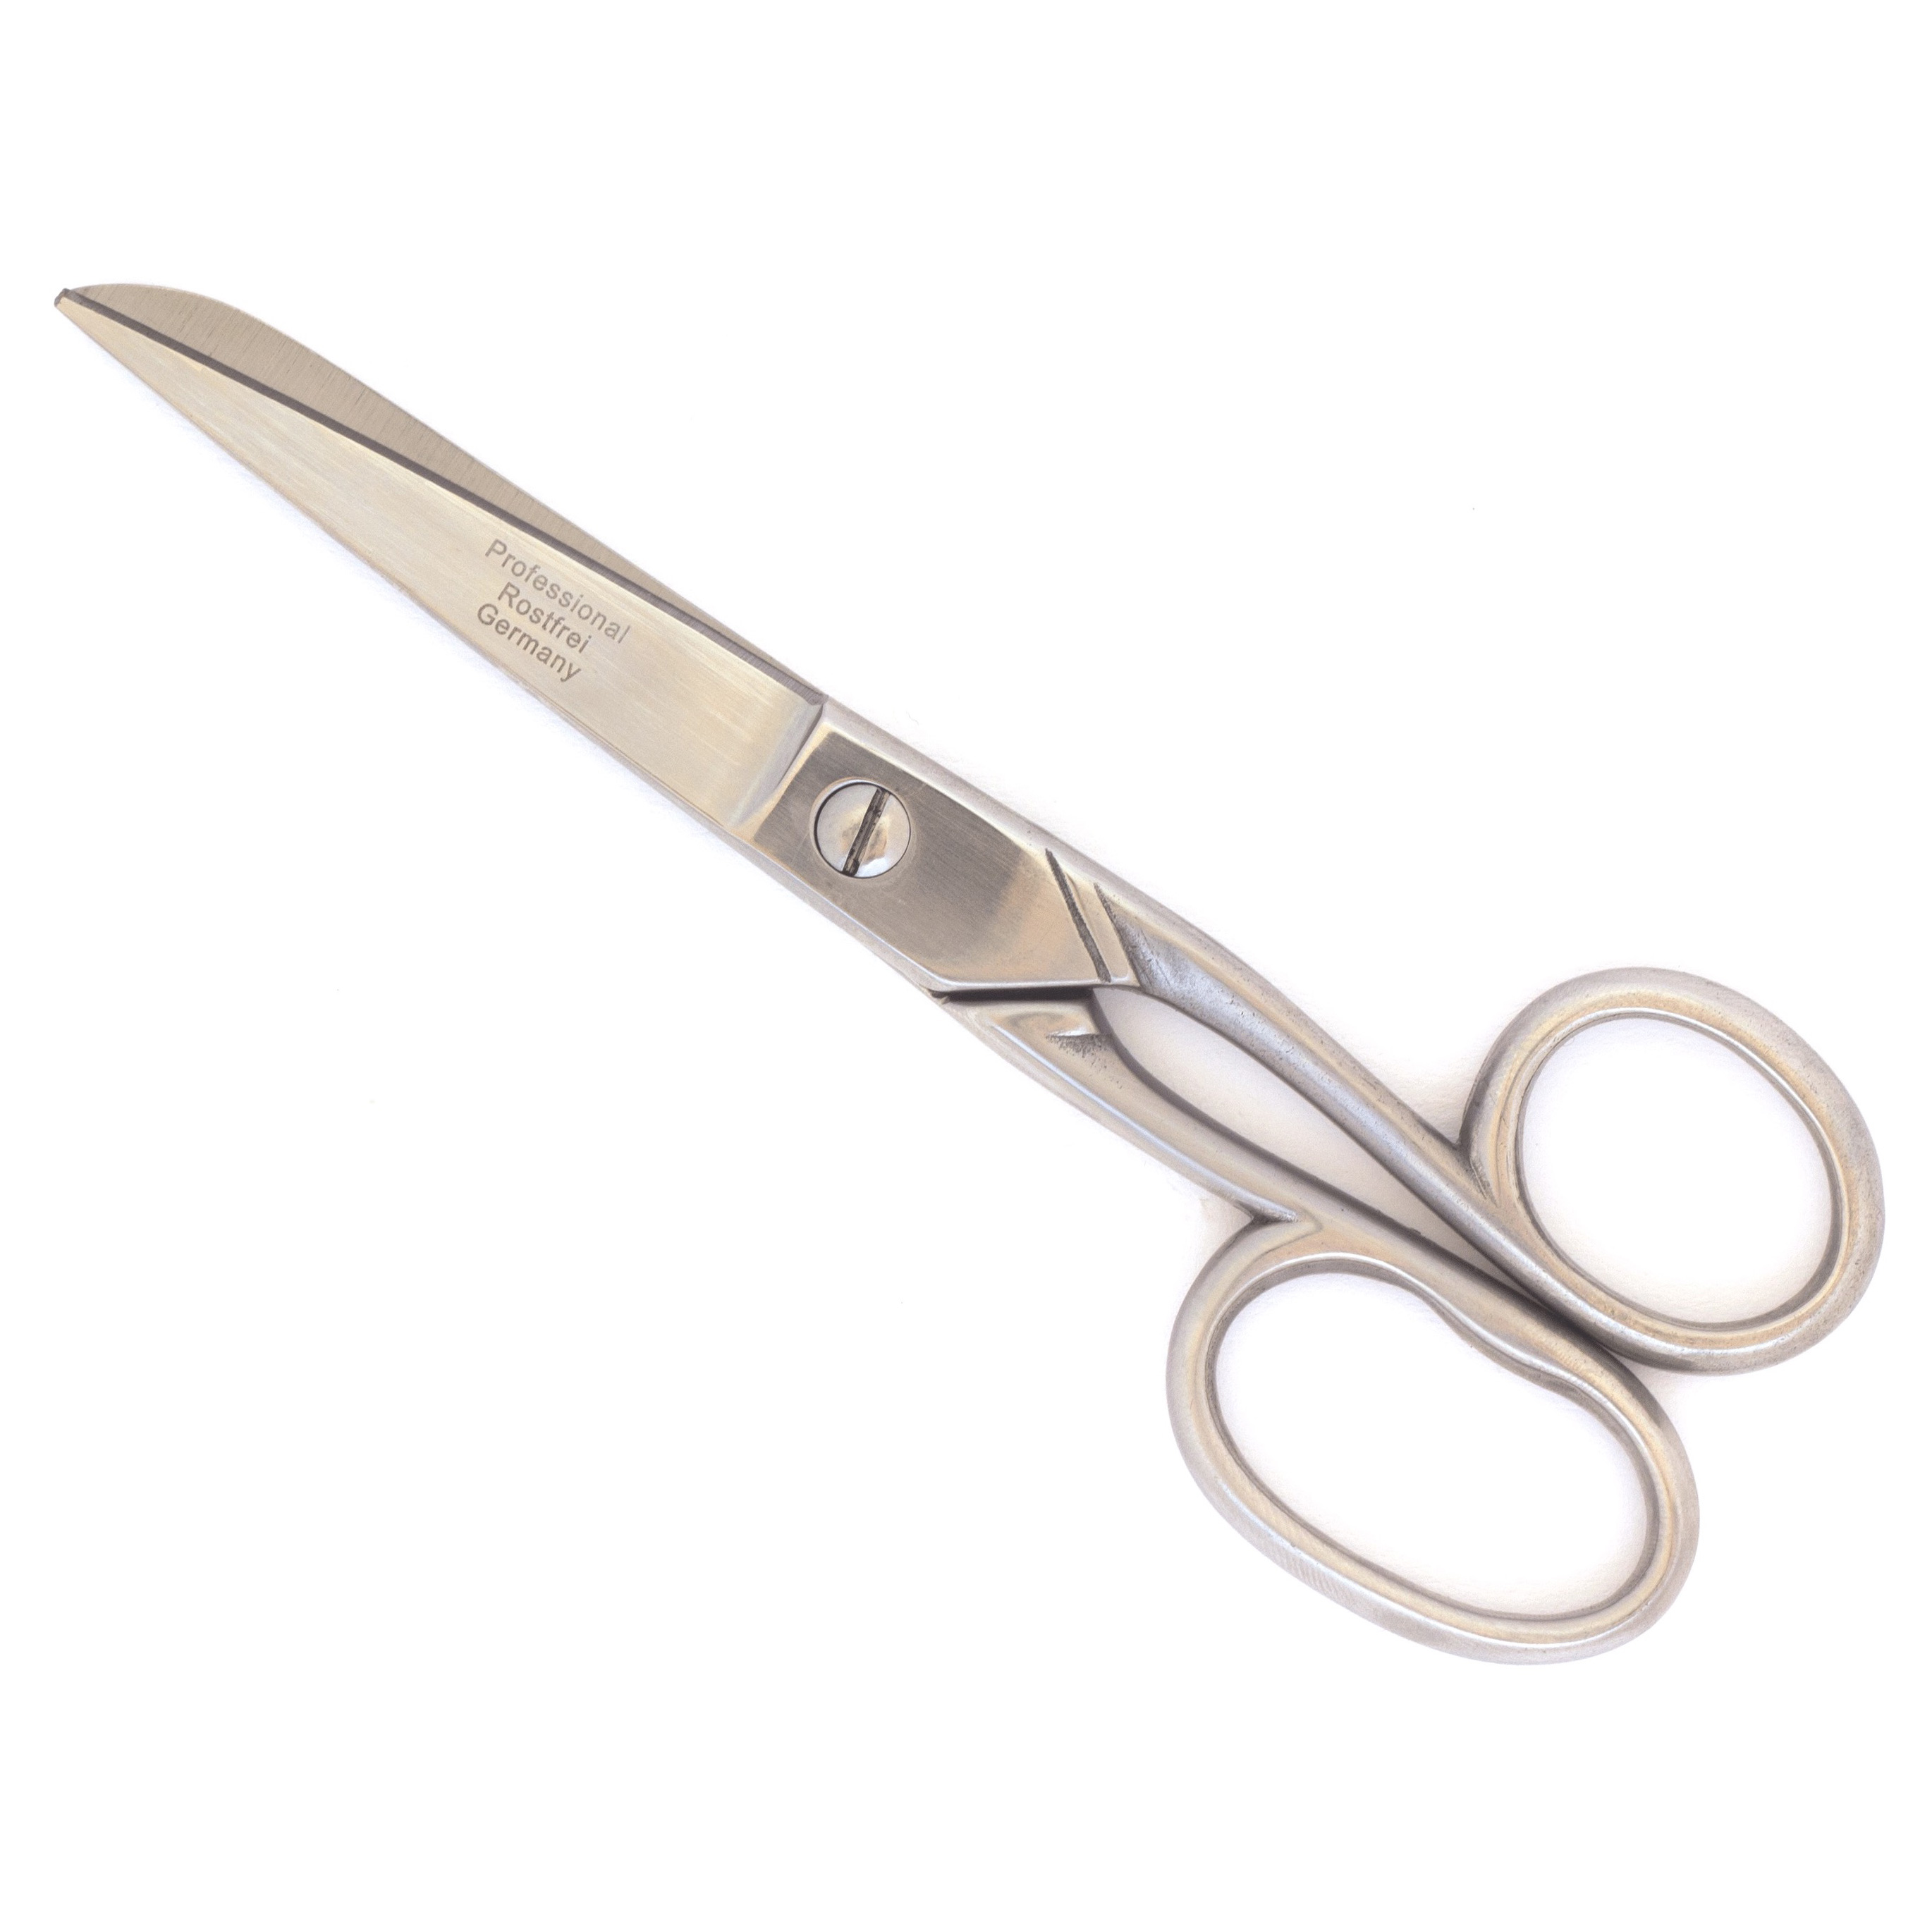 Excellent stainless steel household scissors